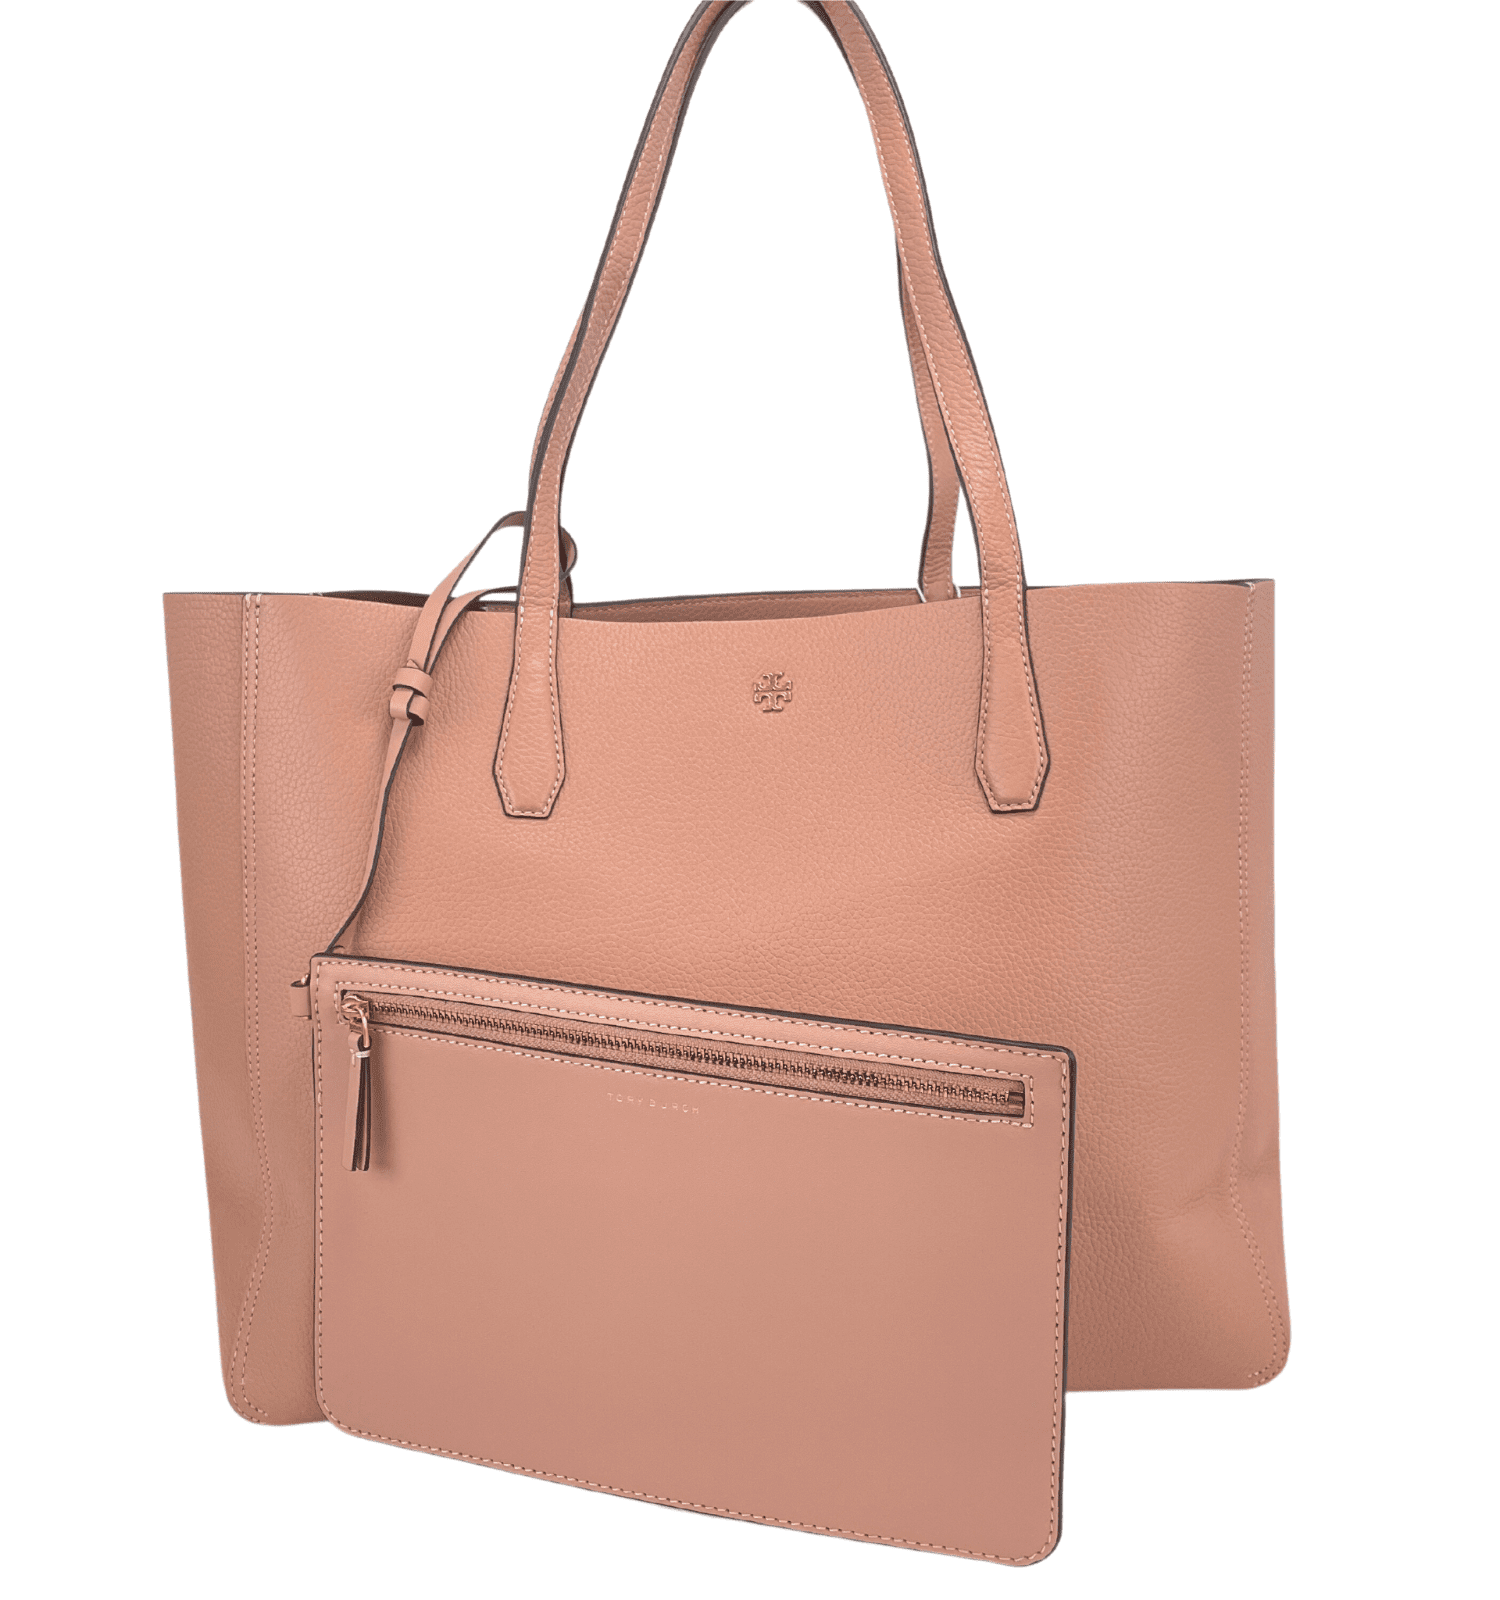 Tory Burch pebble-textured Leather Tote Bag - Farfetch